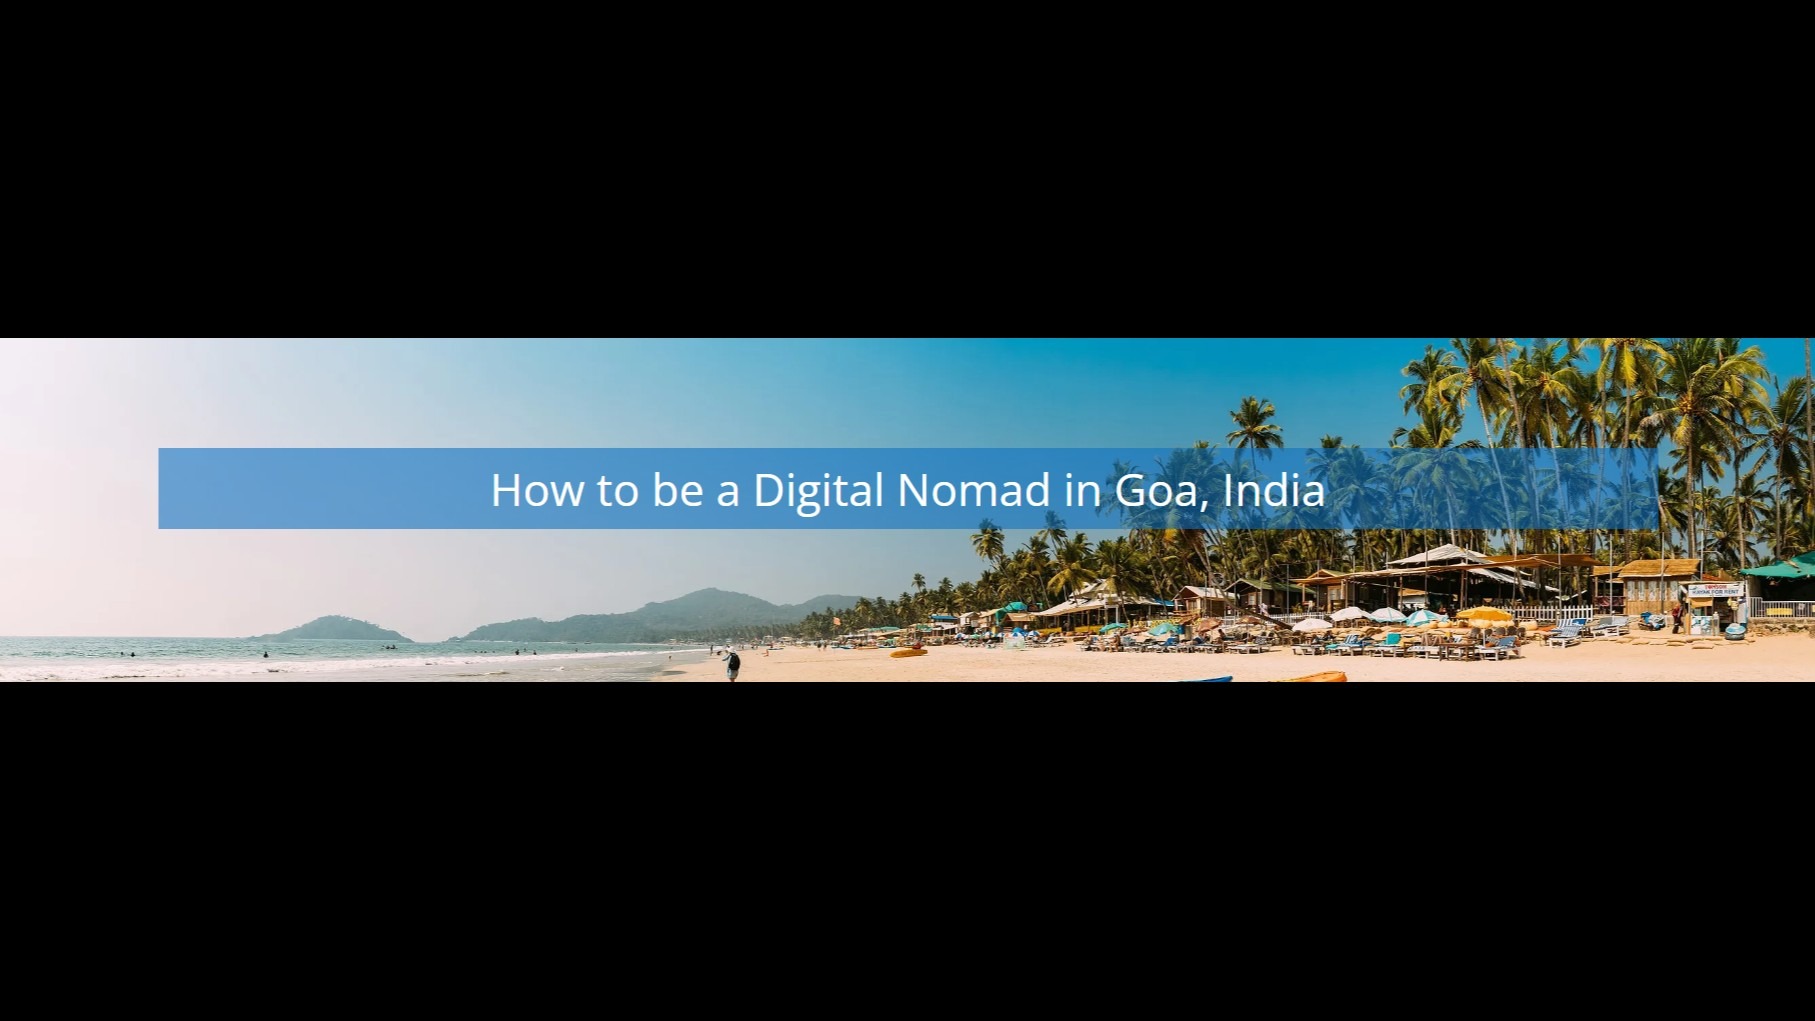 Visiting Goa? Use This Digital Nomad Remote Working Guide To Plan Your Work-Trip